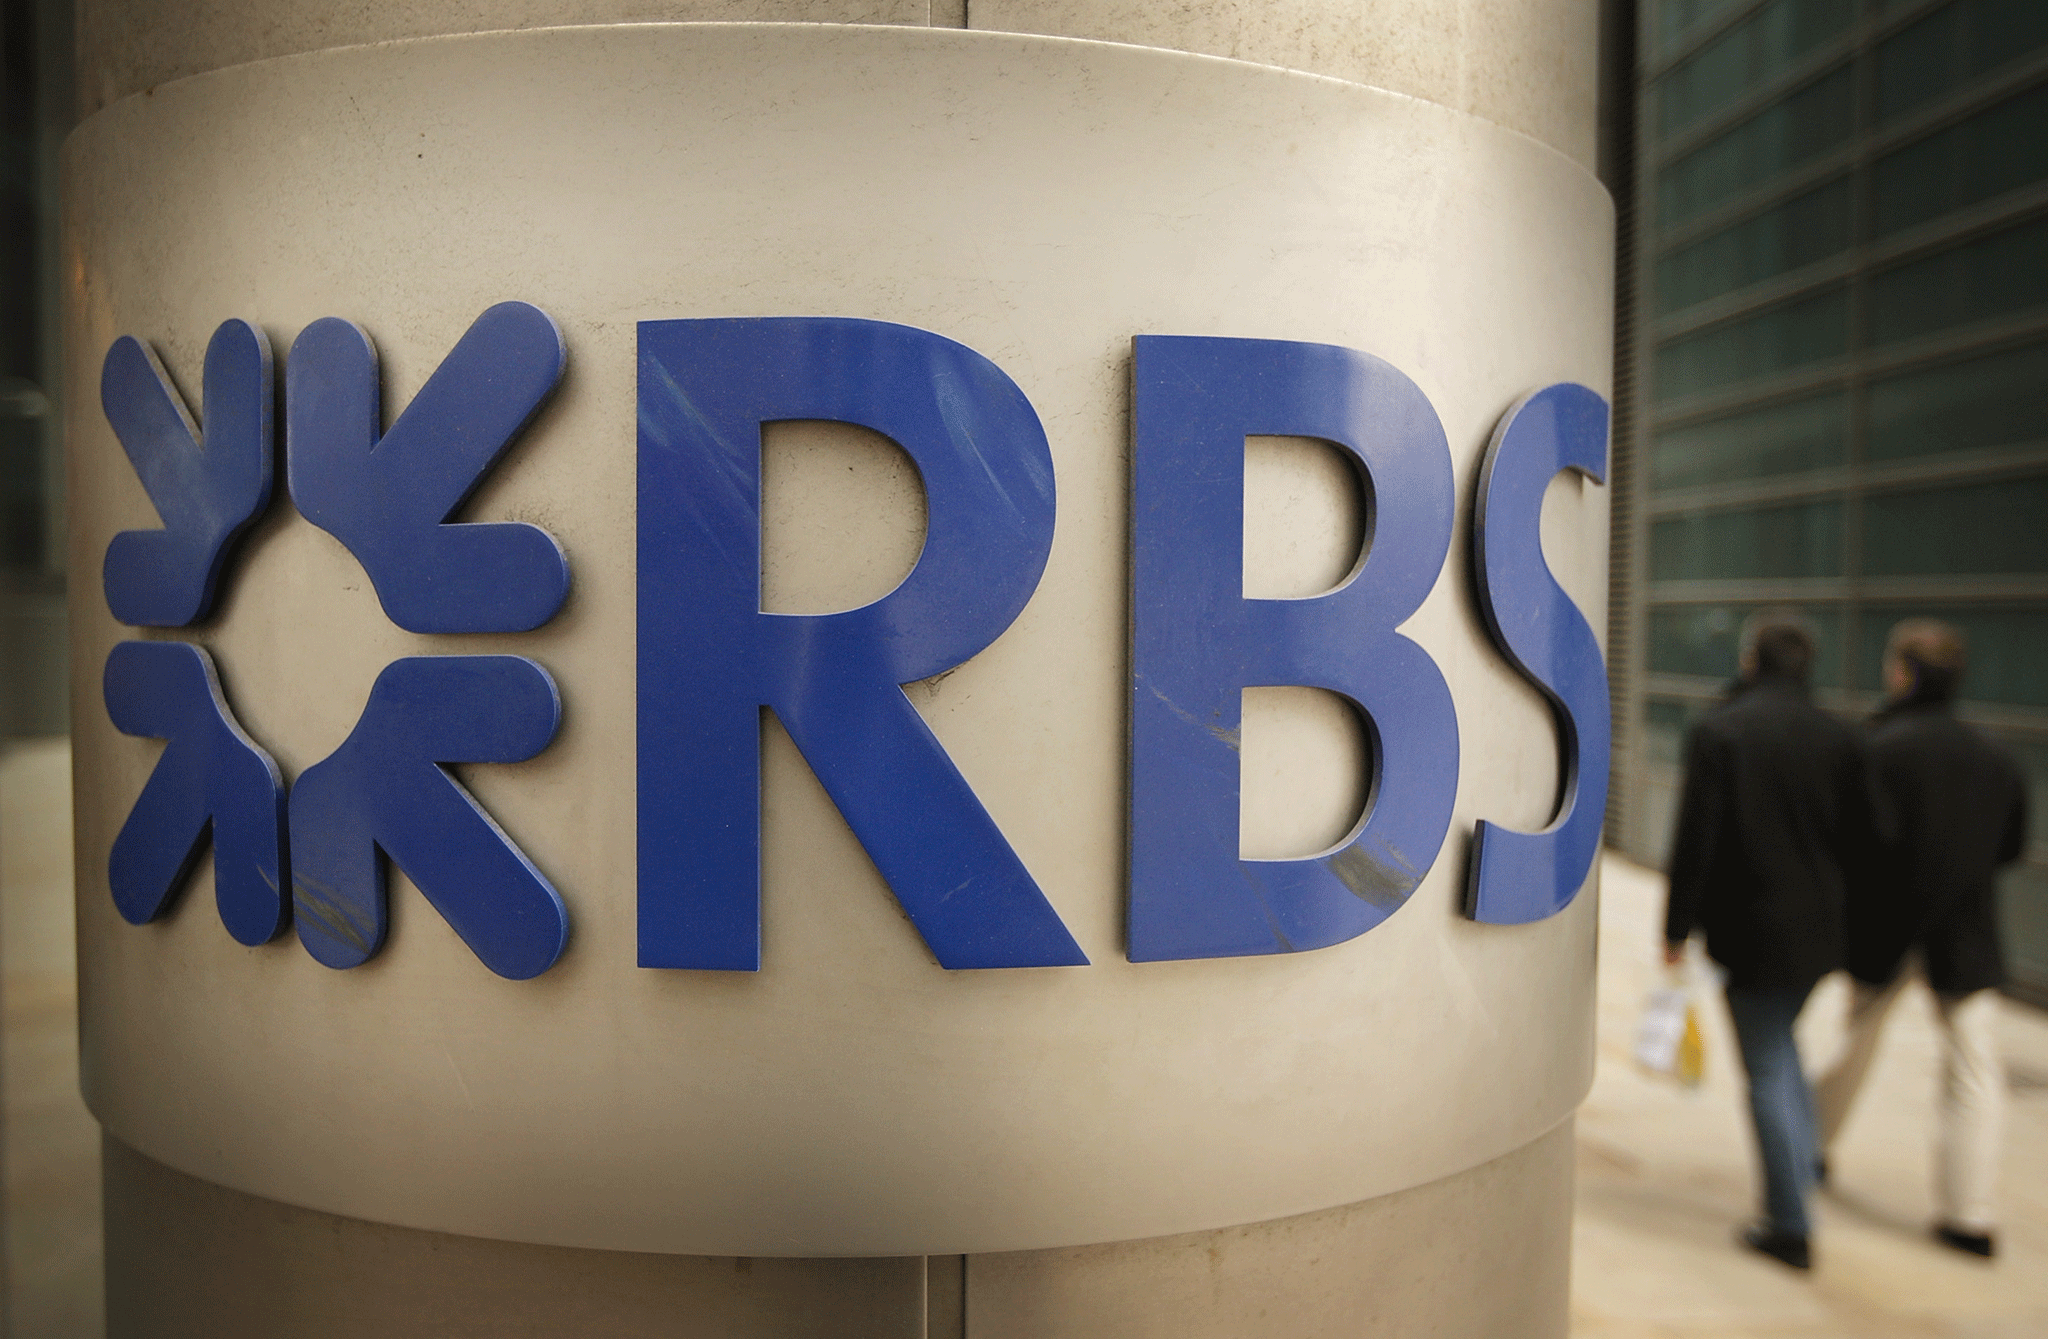 Simple transactions undertaken in branch at NatWest and Royal Bank of Scotland have fallen by 43 per cent since 2010, according to RBS